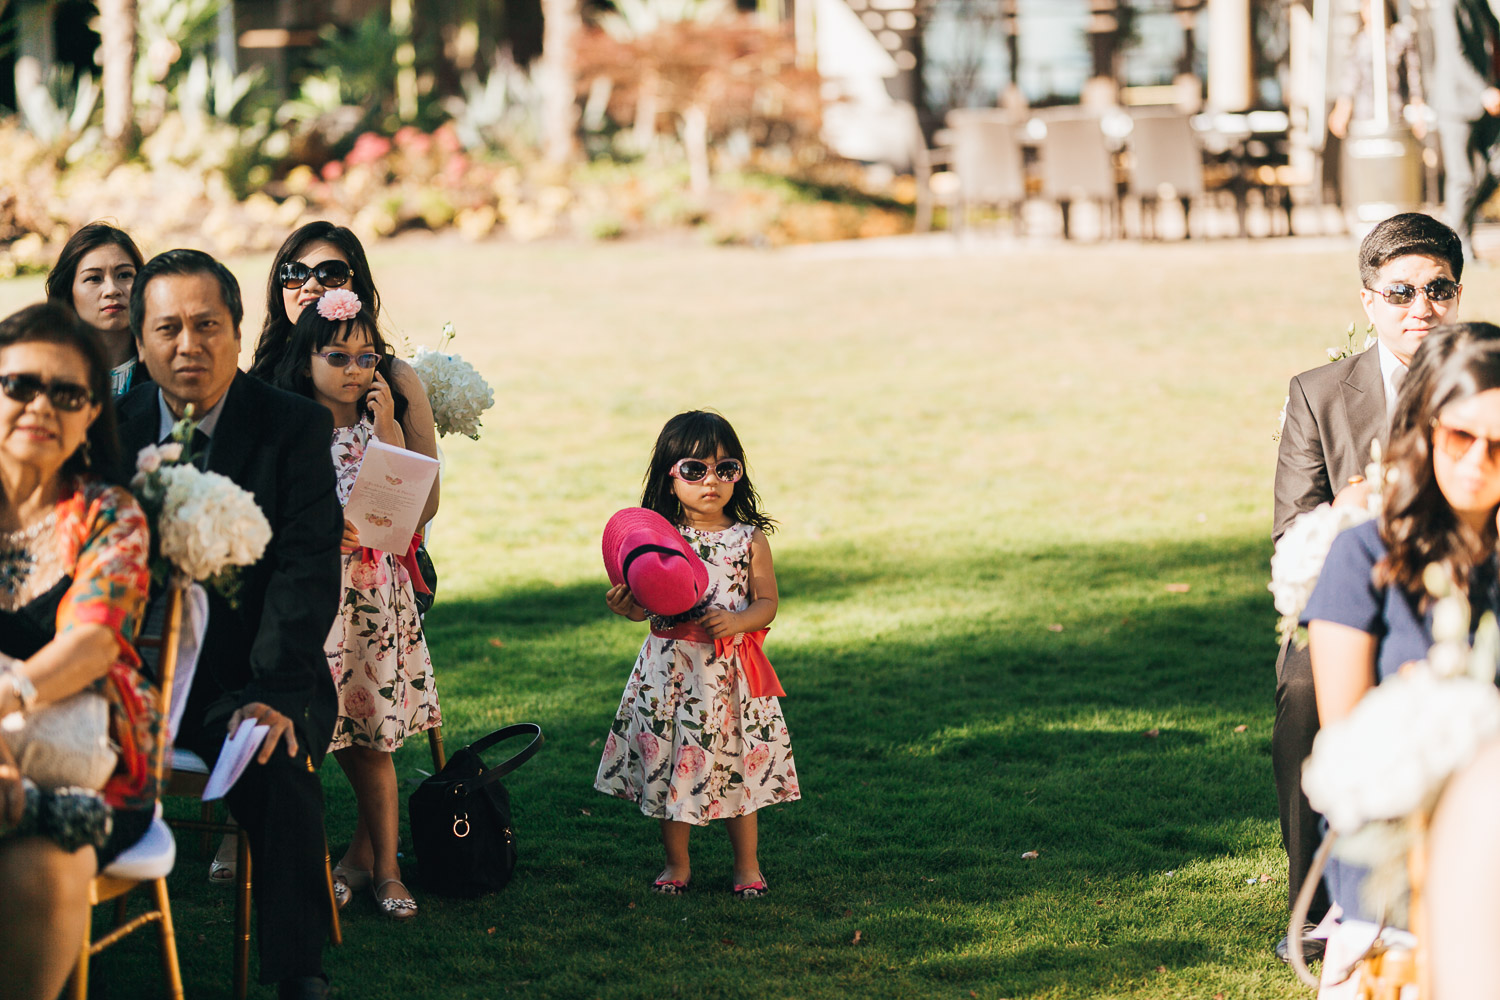 shaughnessy golf and country club wedding ceremony in vancouver bc